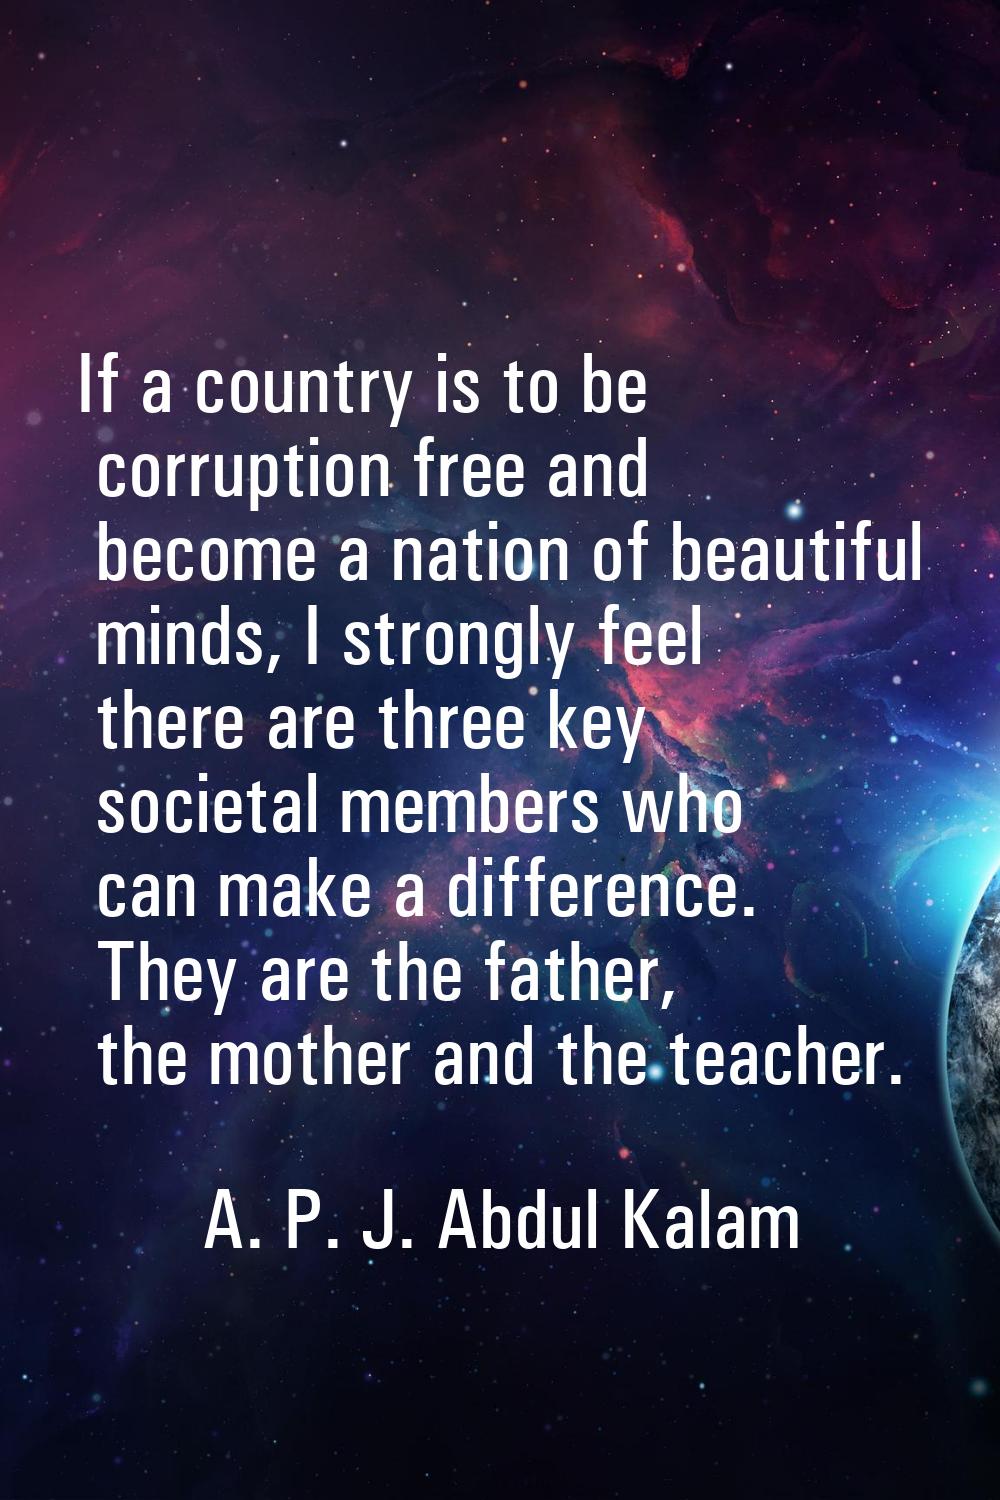 If a country is to be corruption free and become a nation of beautiful minds, I strongly feel there